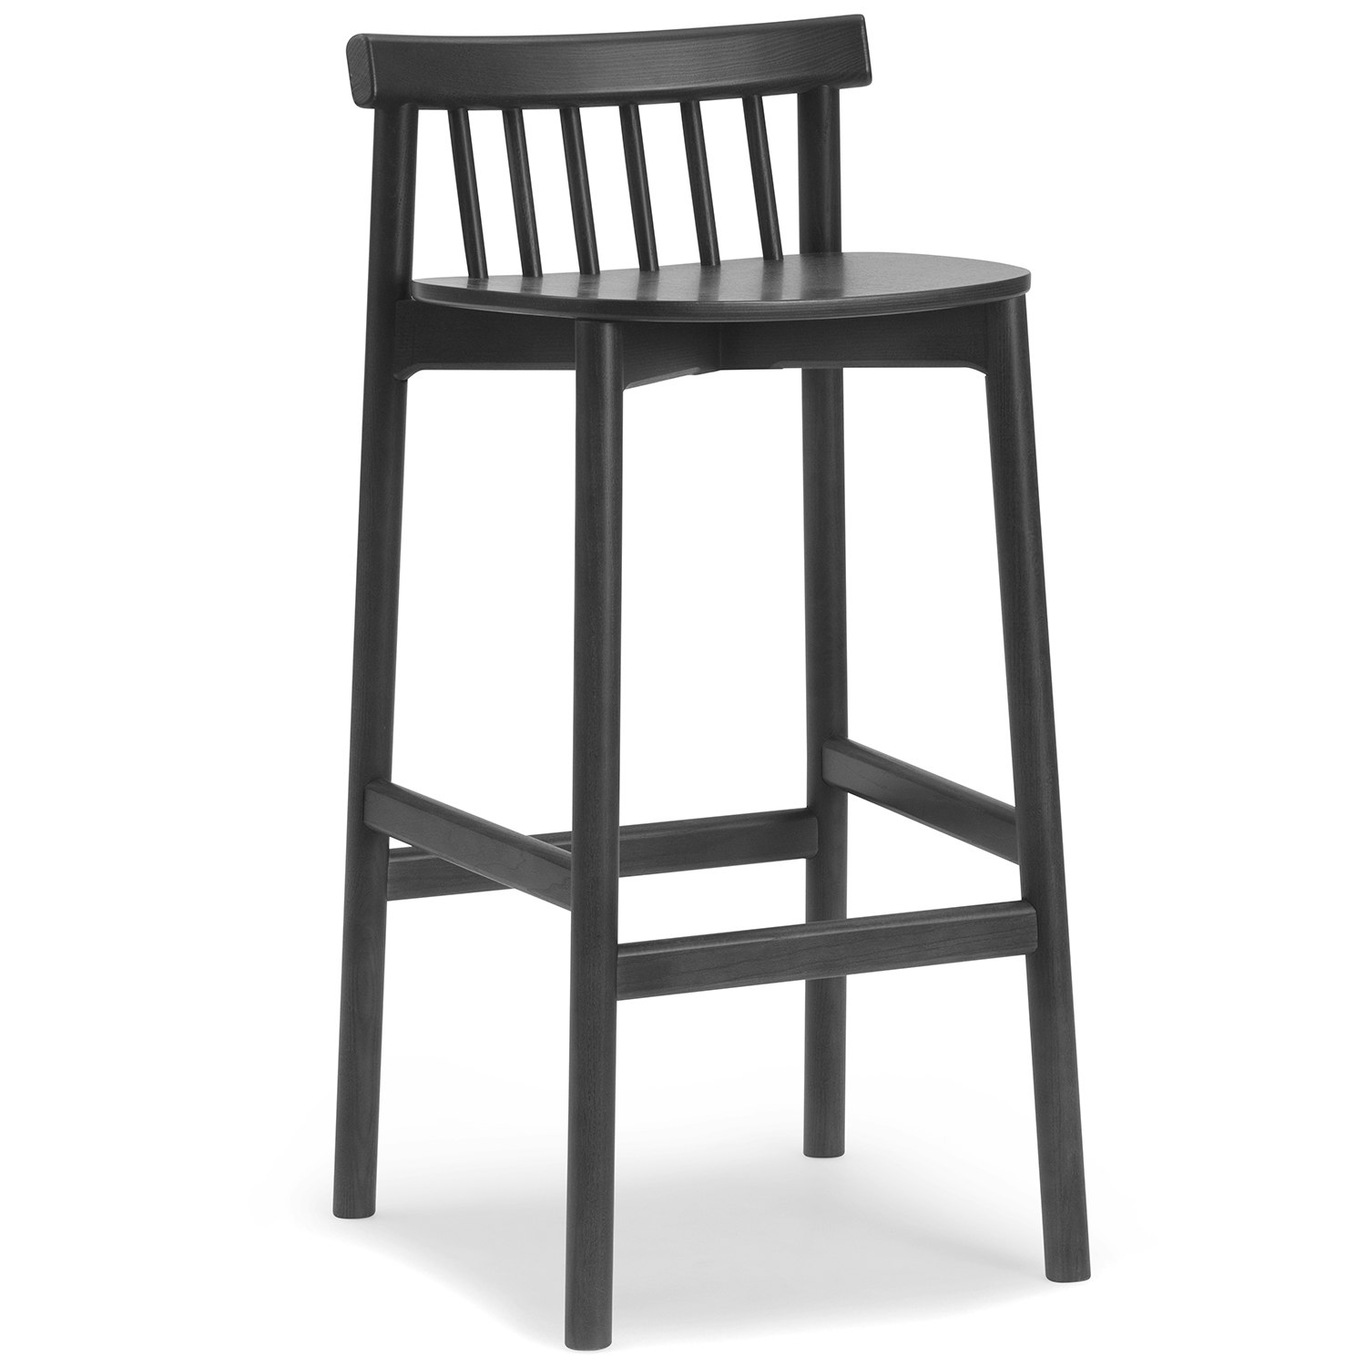 Pind Bar Stool 75 cm, Black Stained Ash